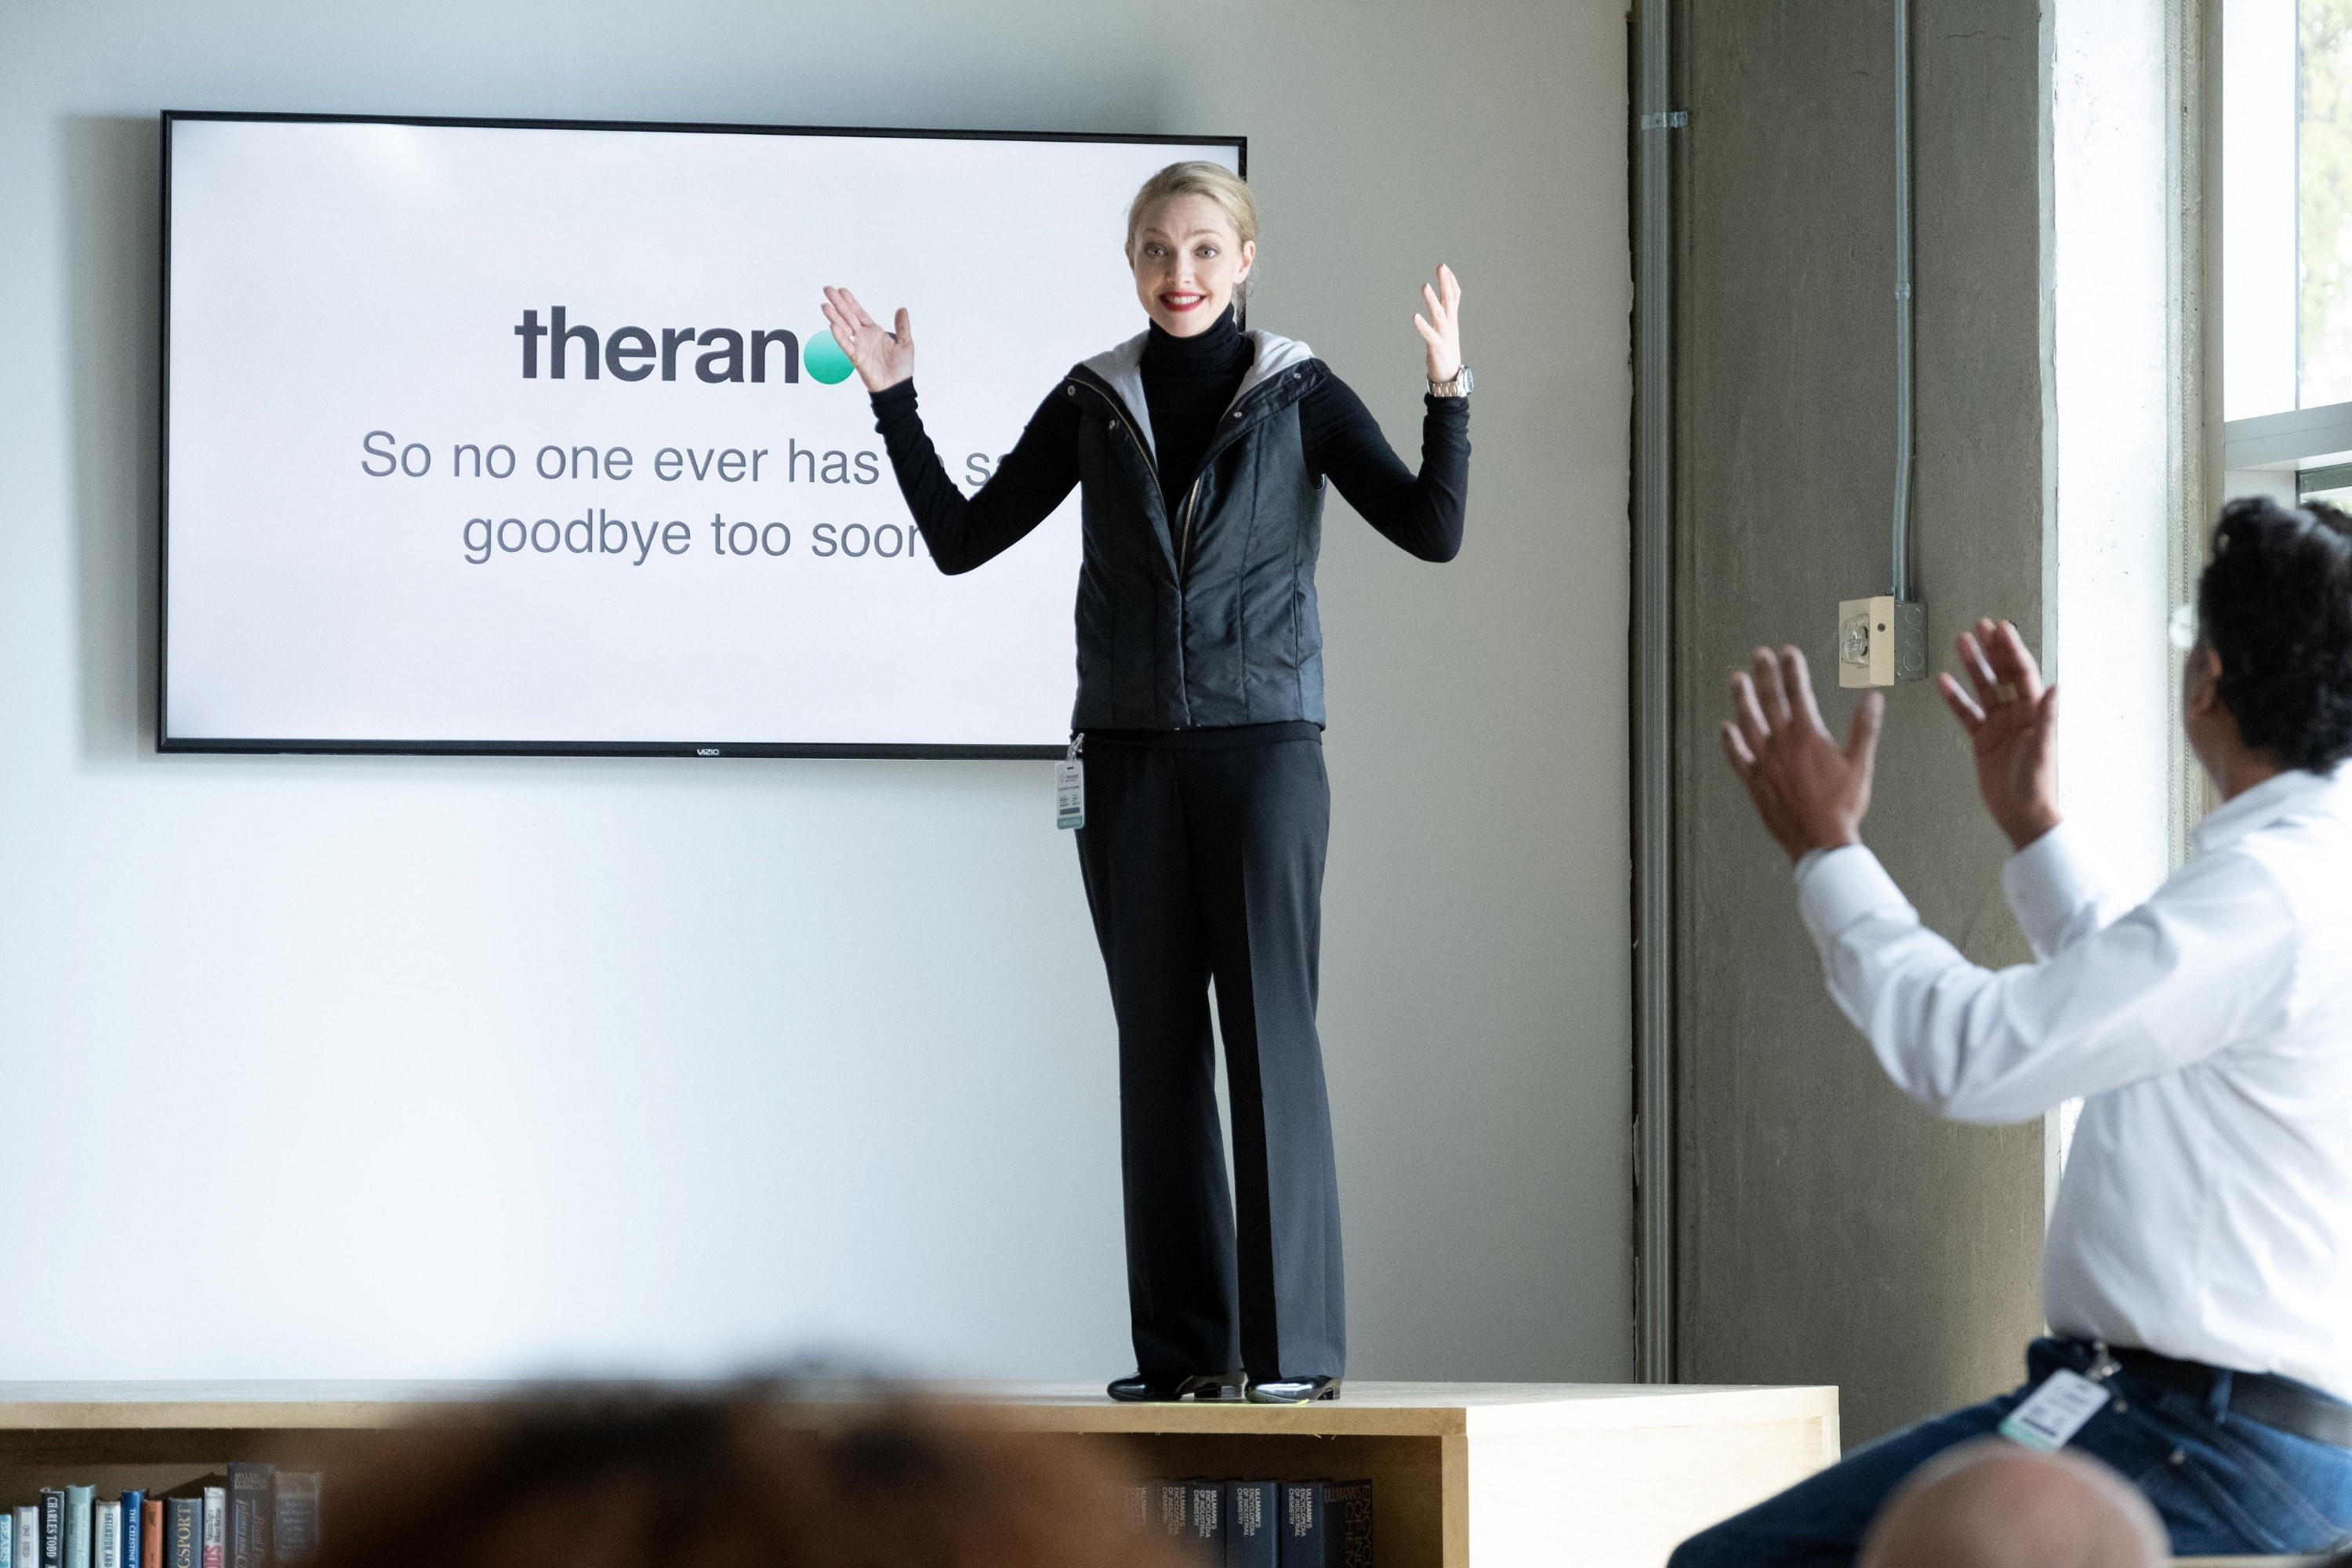 Seyfried as Holmes during a theranos presentation